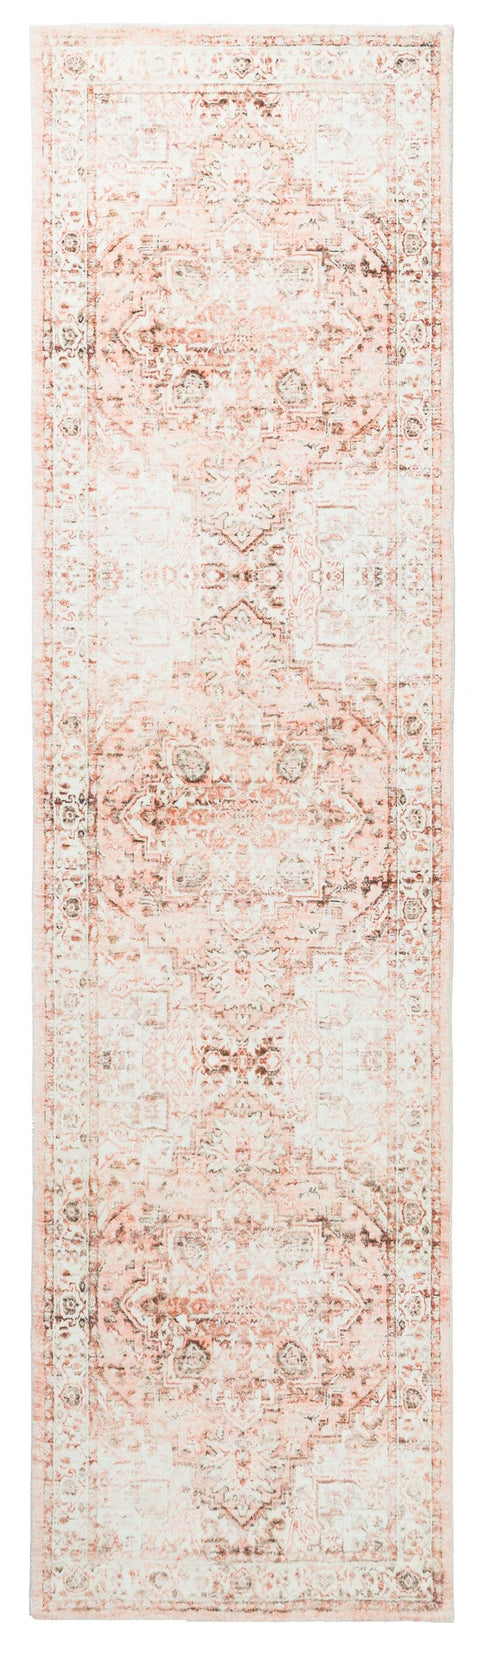 Veronique Peach and Brown Distressed Washable Runner Rug *NO RETURNS UNLESS FAULTY